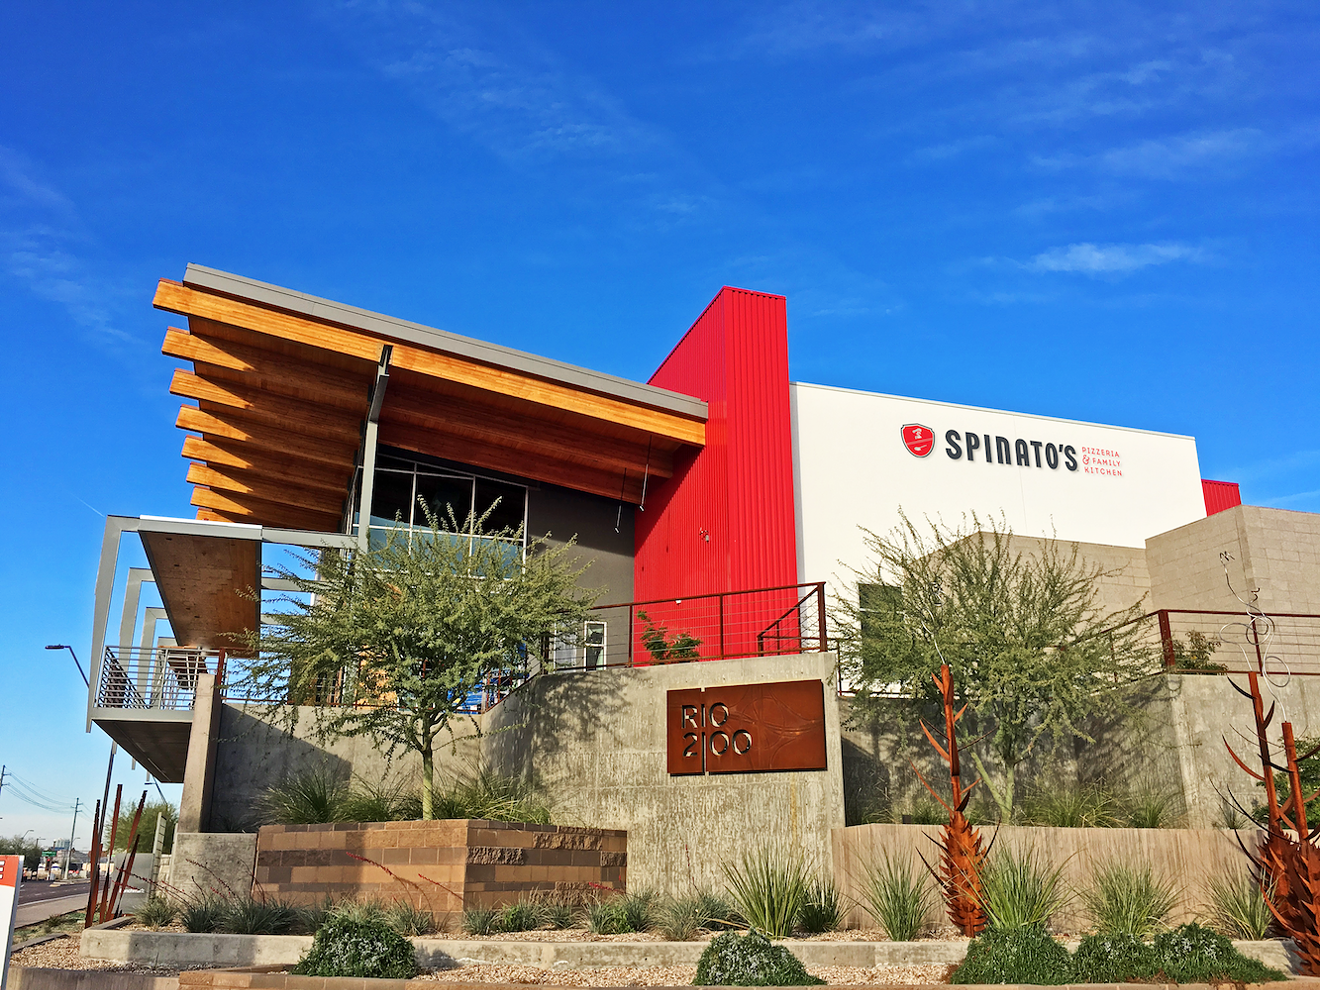 A rendering of the newly branded Spinato's logo at the upcoming Tempe location.